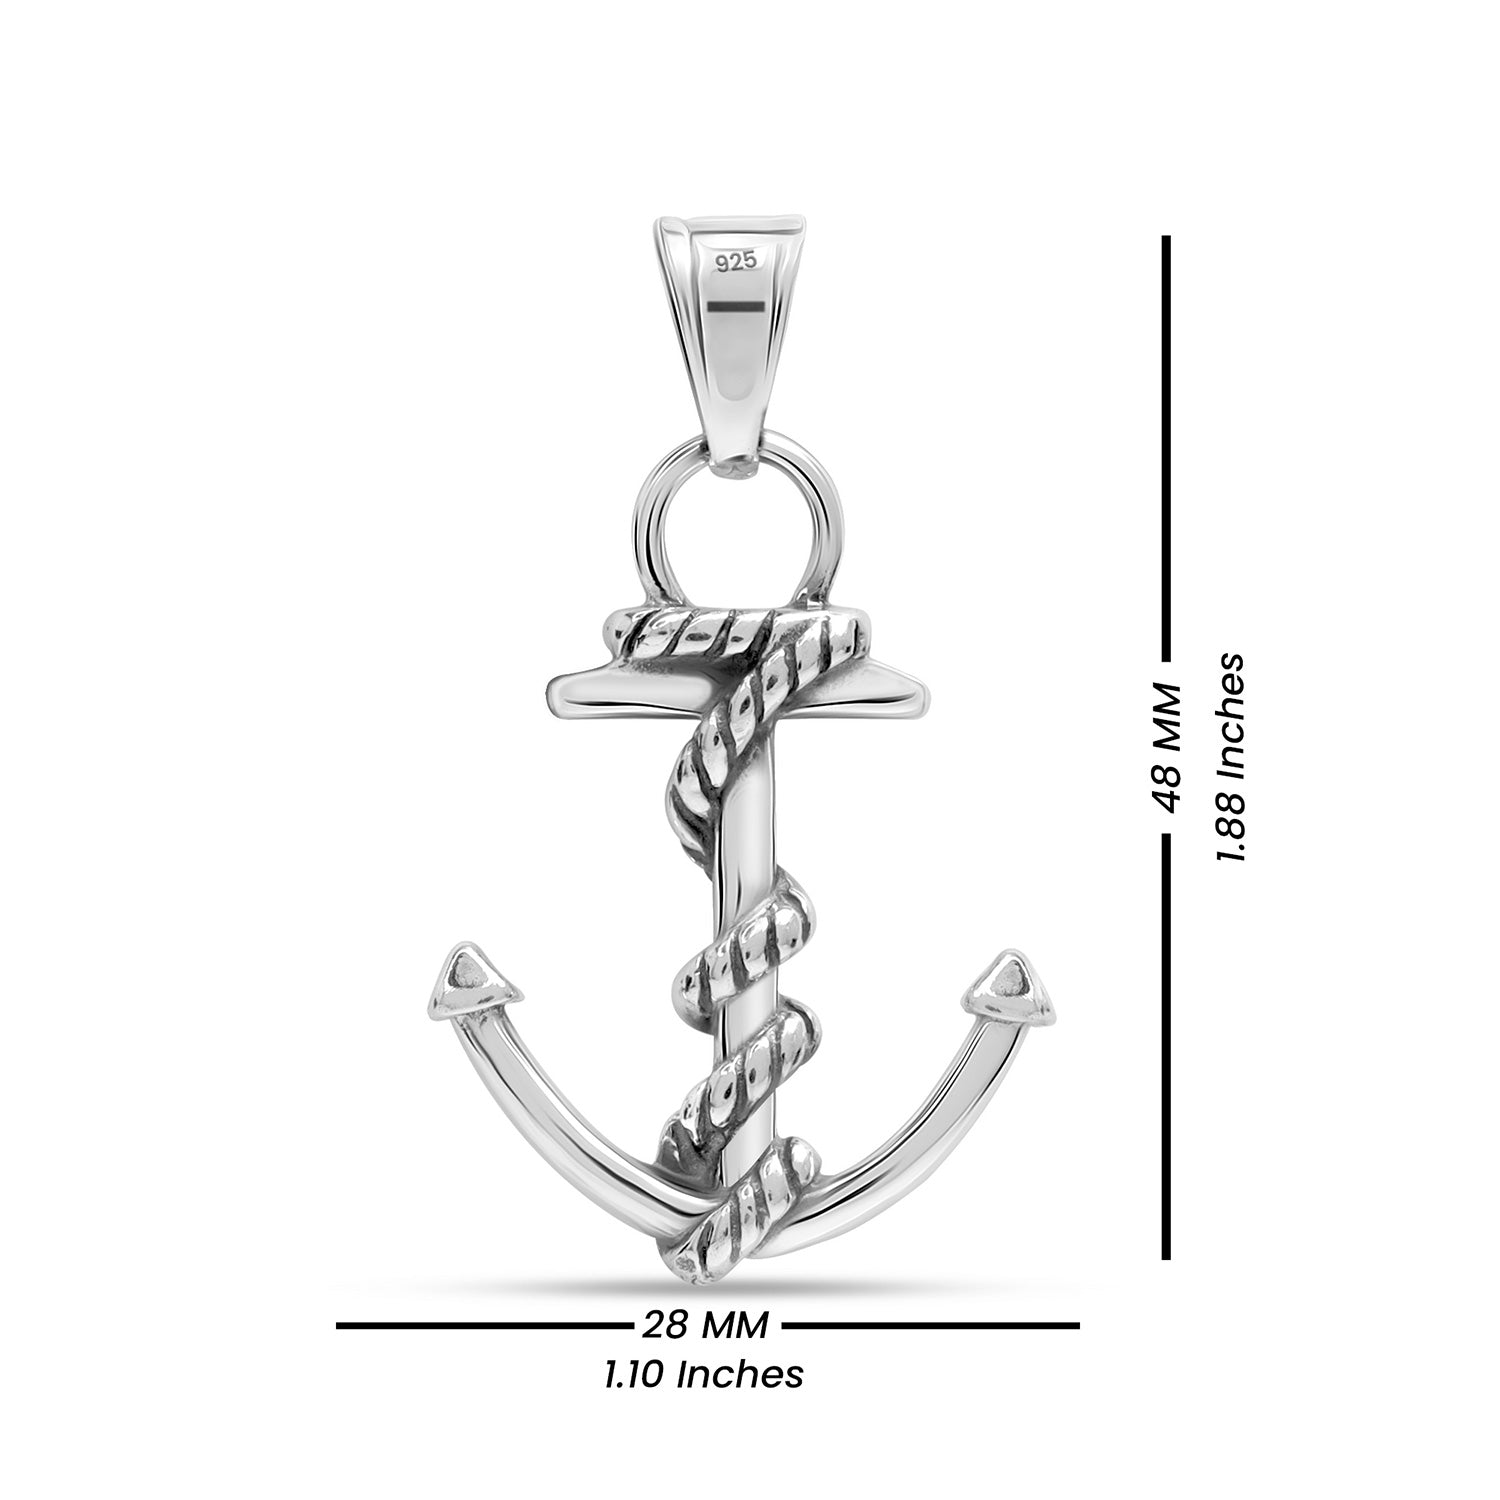 Feraco Anchor Necklace for Men Vintage Navy Nautical Pirate Pendant  Stainless Steel Anchor Chain Necklace, 21.6 inch Black | Amazon.com